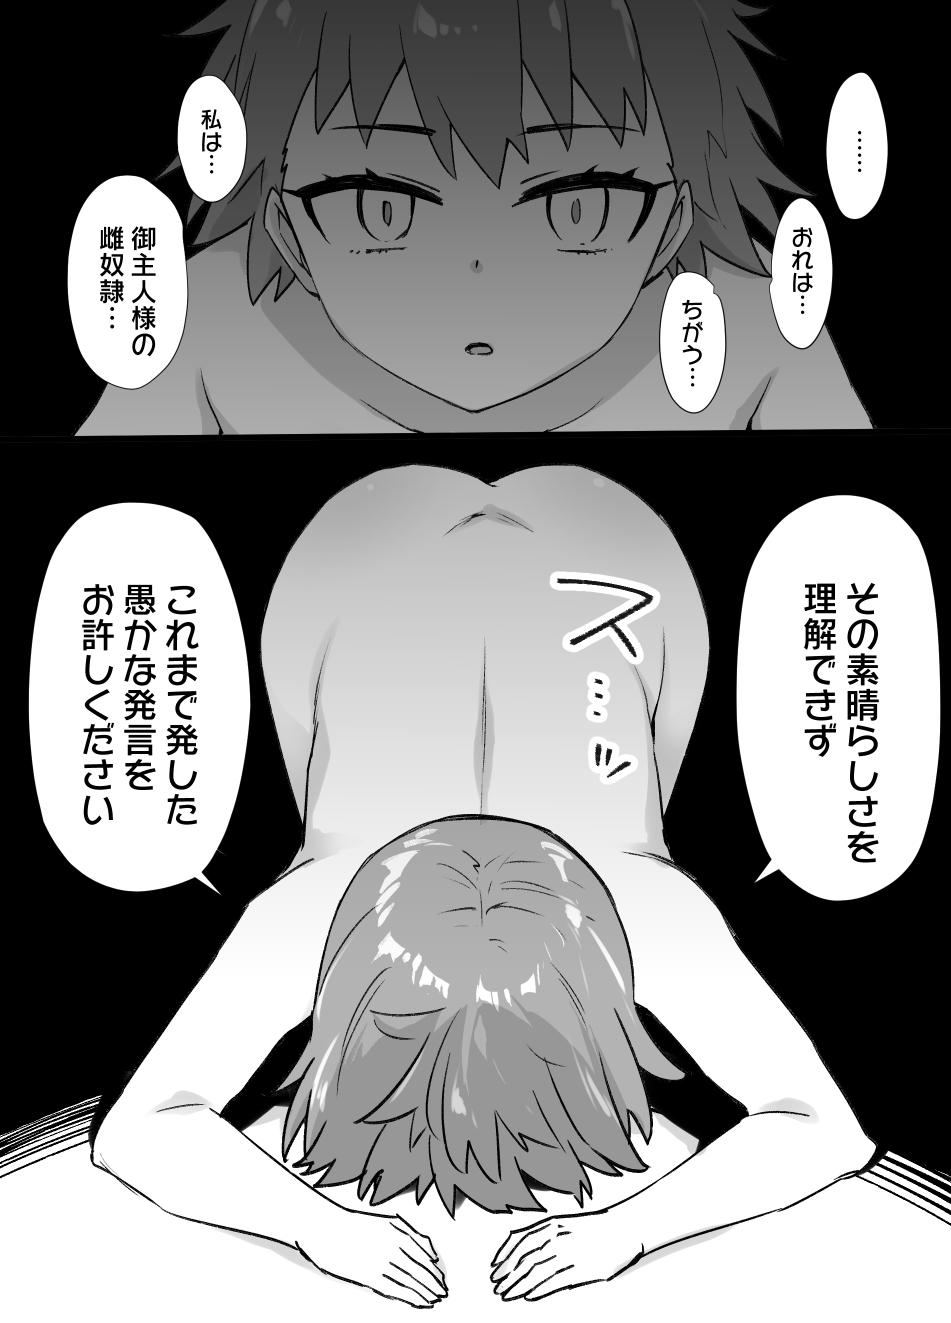 Homemade A manga about Shirou Emiya who went to save Rin Tohsaka from captivity and is transformed into a female slave through physical feminization and brainwashing[Fate/ stay night) - Fate stay night Pussy Play - Page 6